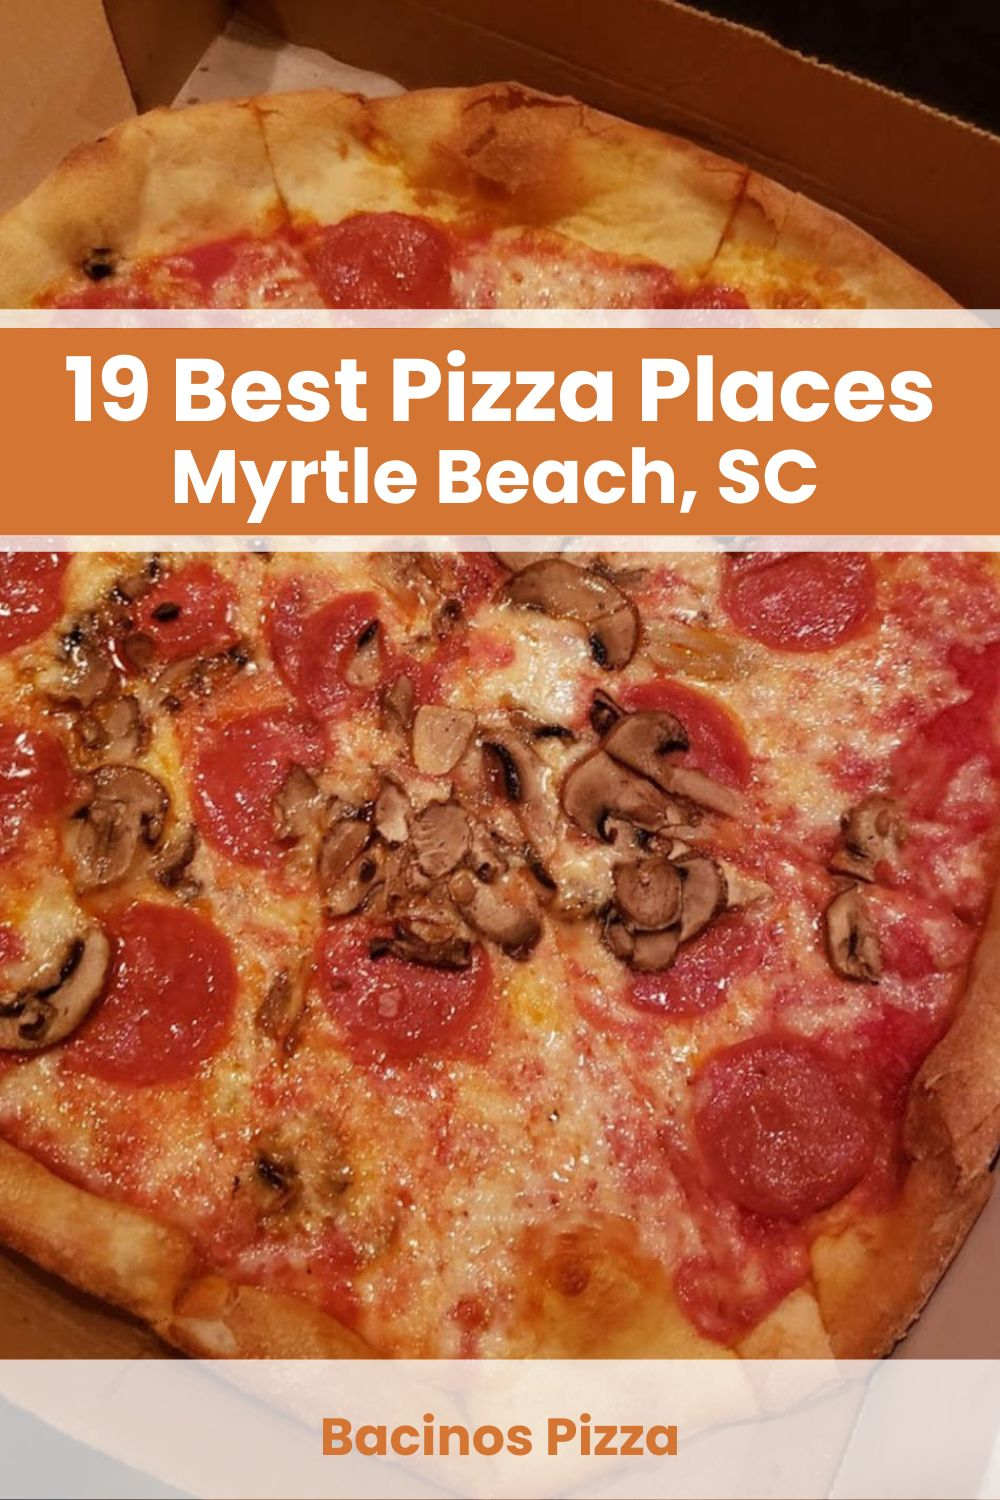 Best Pizza Places in the Myrtle Beach